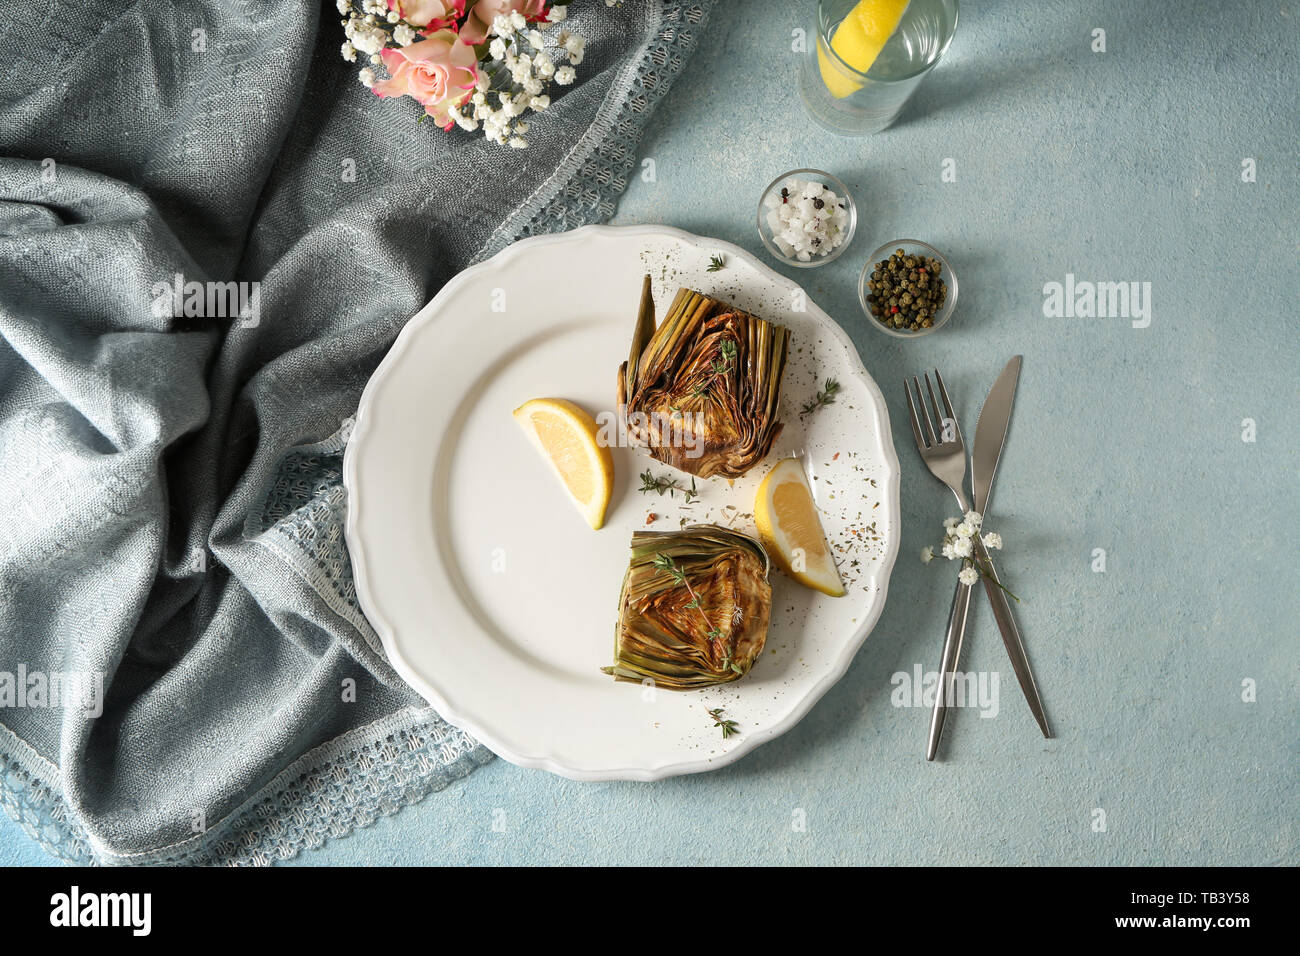 Plate with tasty grilled artichoke on table Stock Photo